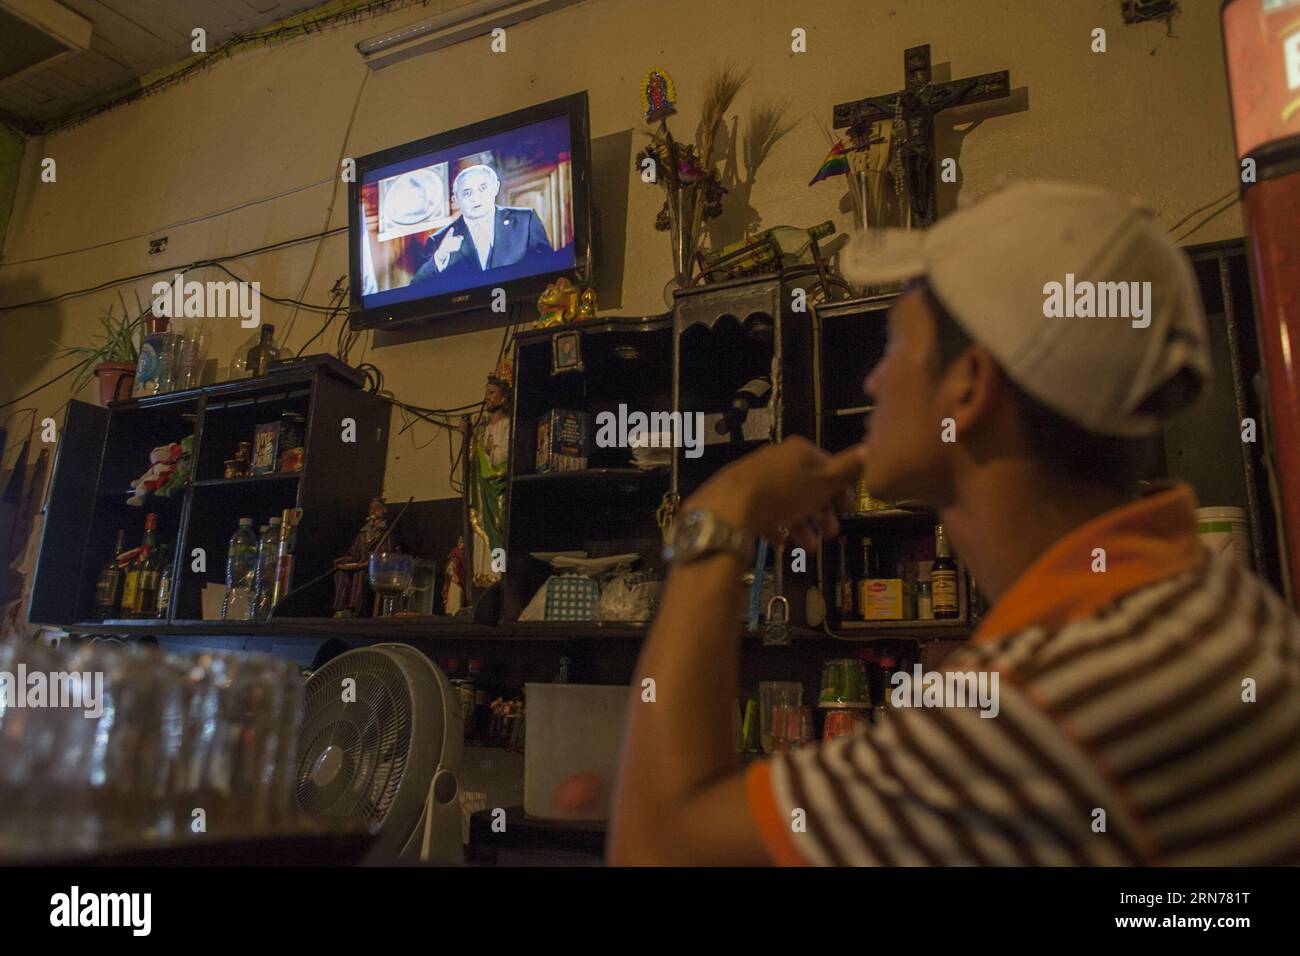 (150824) -- GUATEMALA CITY, Aug. 23, 2015 -- A man watches TV as Guatemala s President Otto Perez Molina delivering a speech, in Guatemala City, Guatemala, on Aug. 23, 2015. President Otto Perez Molina says he won t resign from office despite investigators saying he may have been involved in a customs fraud scandal that has thrown the country into political crisis. Luis Echeverria) GUATEMALA-GUATEMALA CITY-OTTO PEREZ MOLINA e LuisxEcheverria PUBLICATIONxNOTxINxCHN   150824 Guatemala City Aug 23 2015 a Man Watches TV As Guatemala S President Otto Perez Molina Delivering a Speech in Guatemala Ci Stock Photo